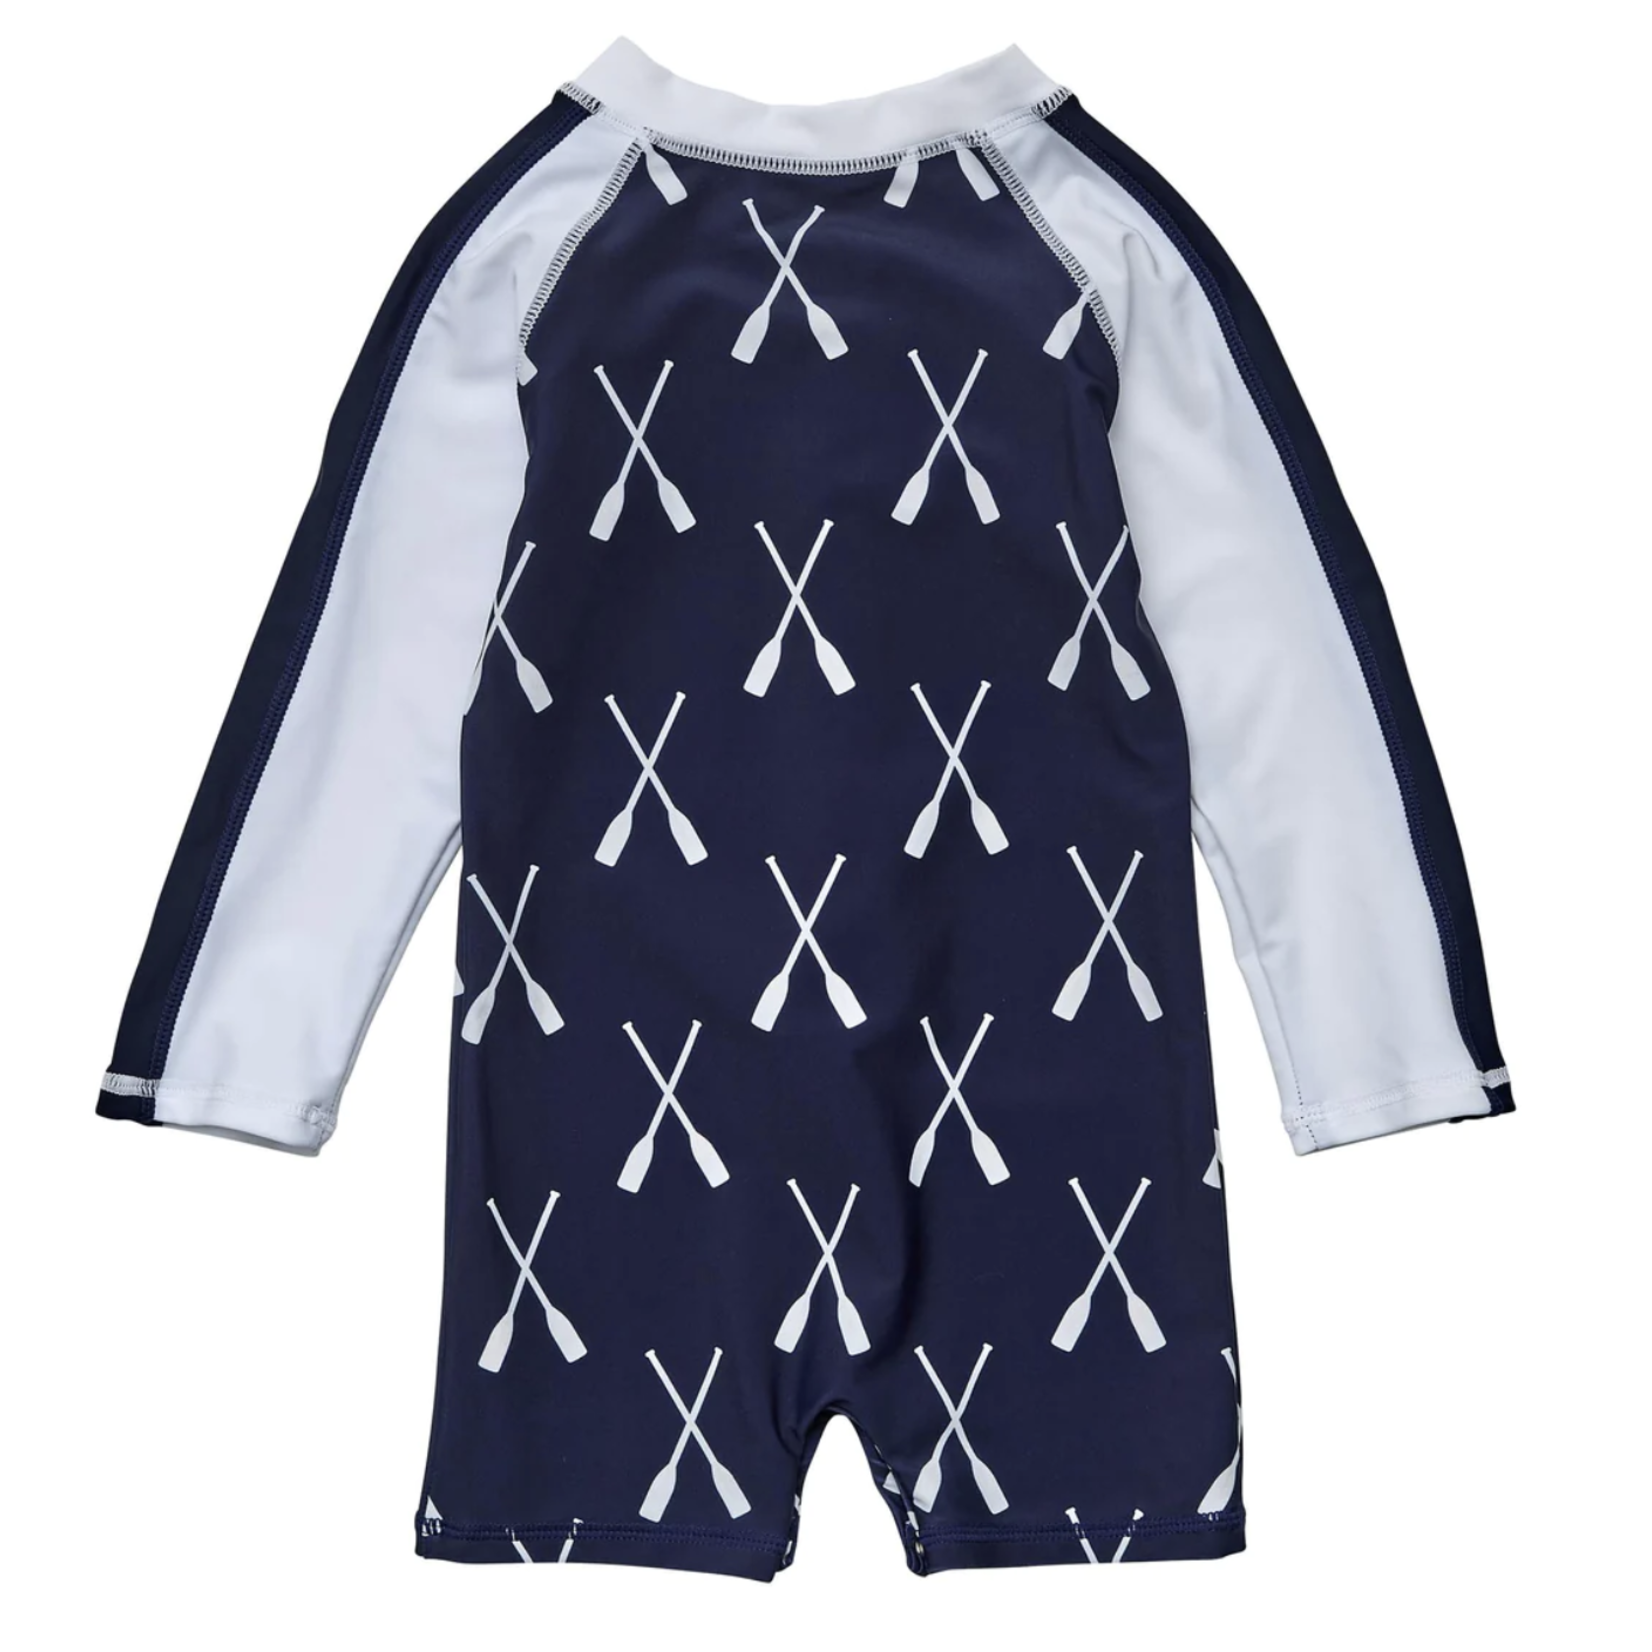 SNAPPERROCK RIVIERA ROWERS L/S SUNSUIT BABY